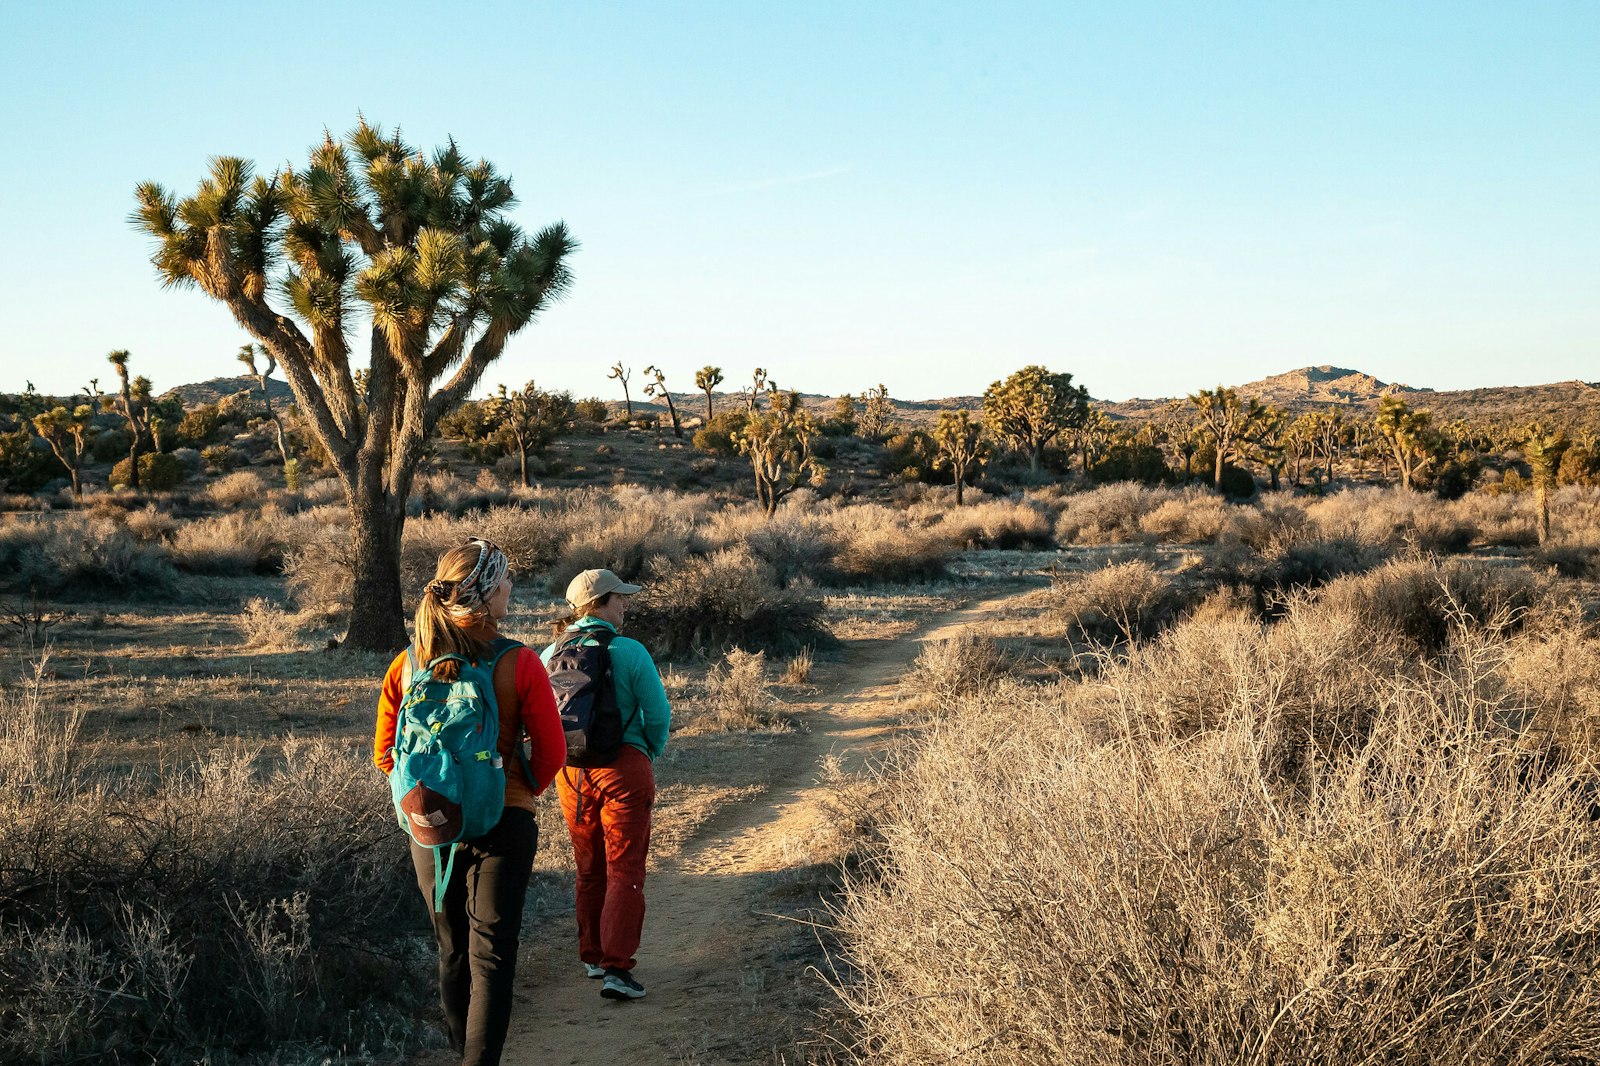 Two hikers walk through a desert landscape with mixed shrubs and mature Joshua Trees.